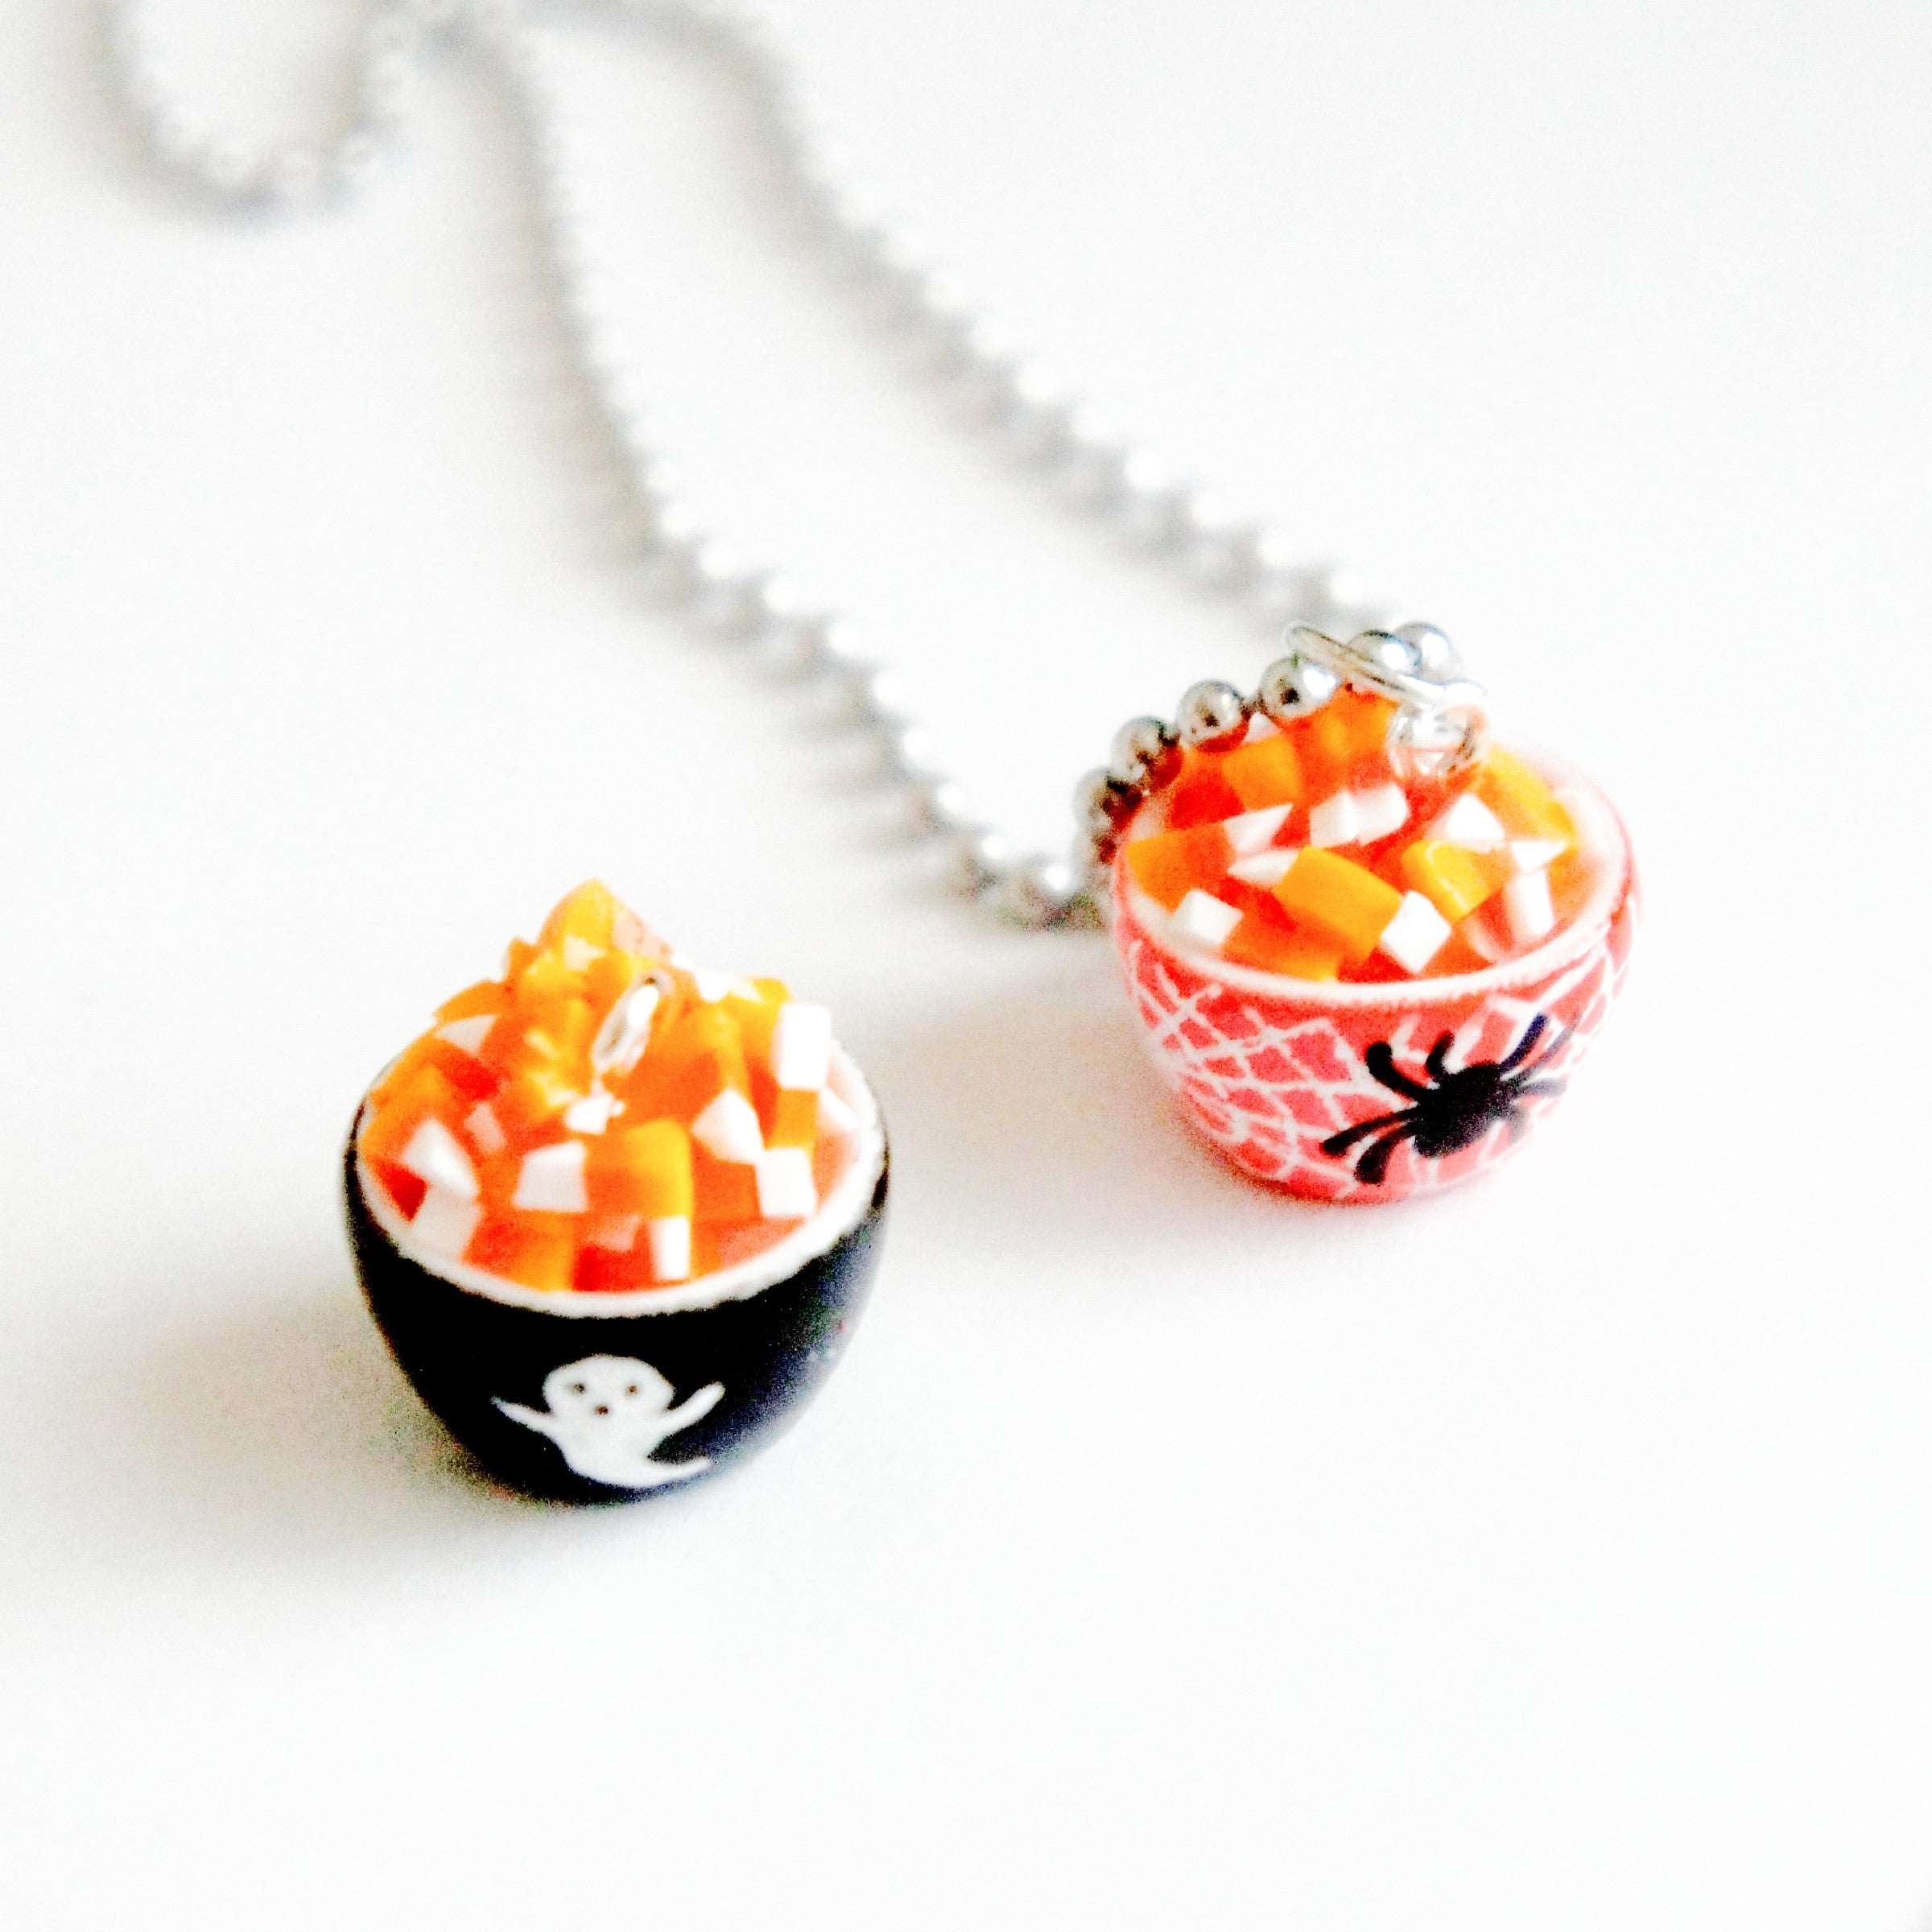 Candycorn Bowl Necklace - Jillicious charms and accessories